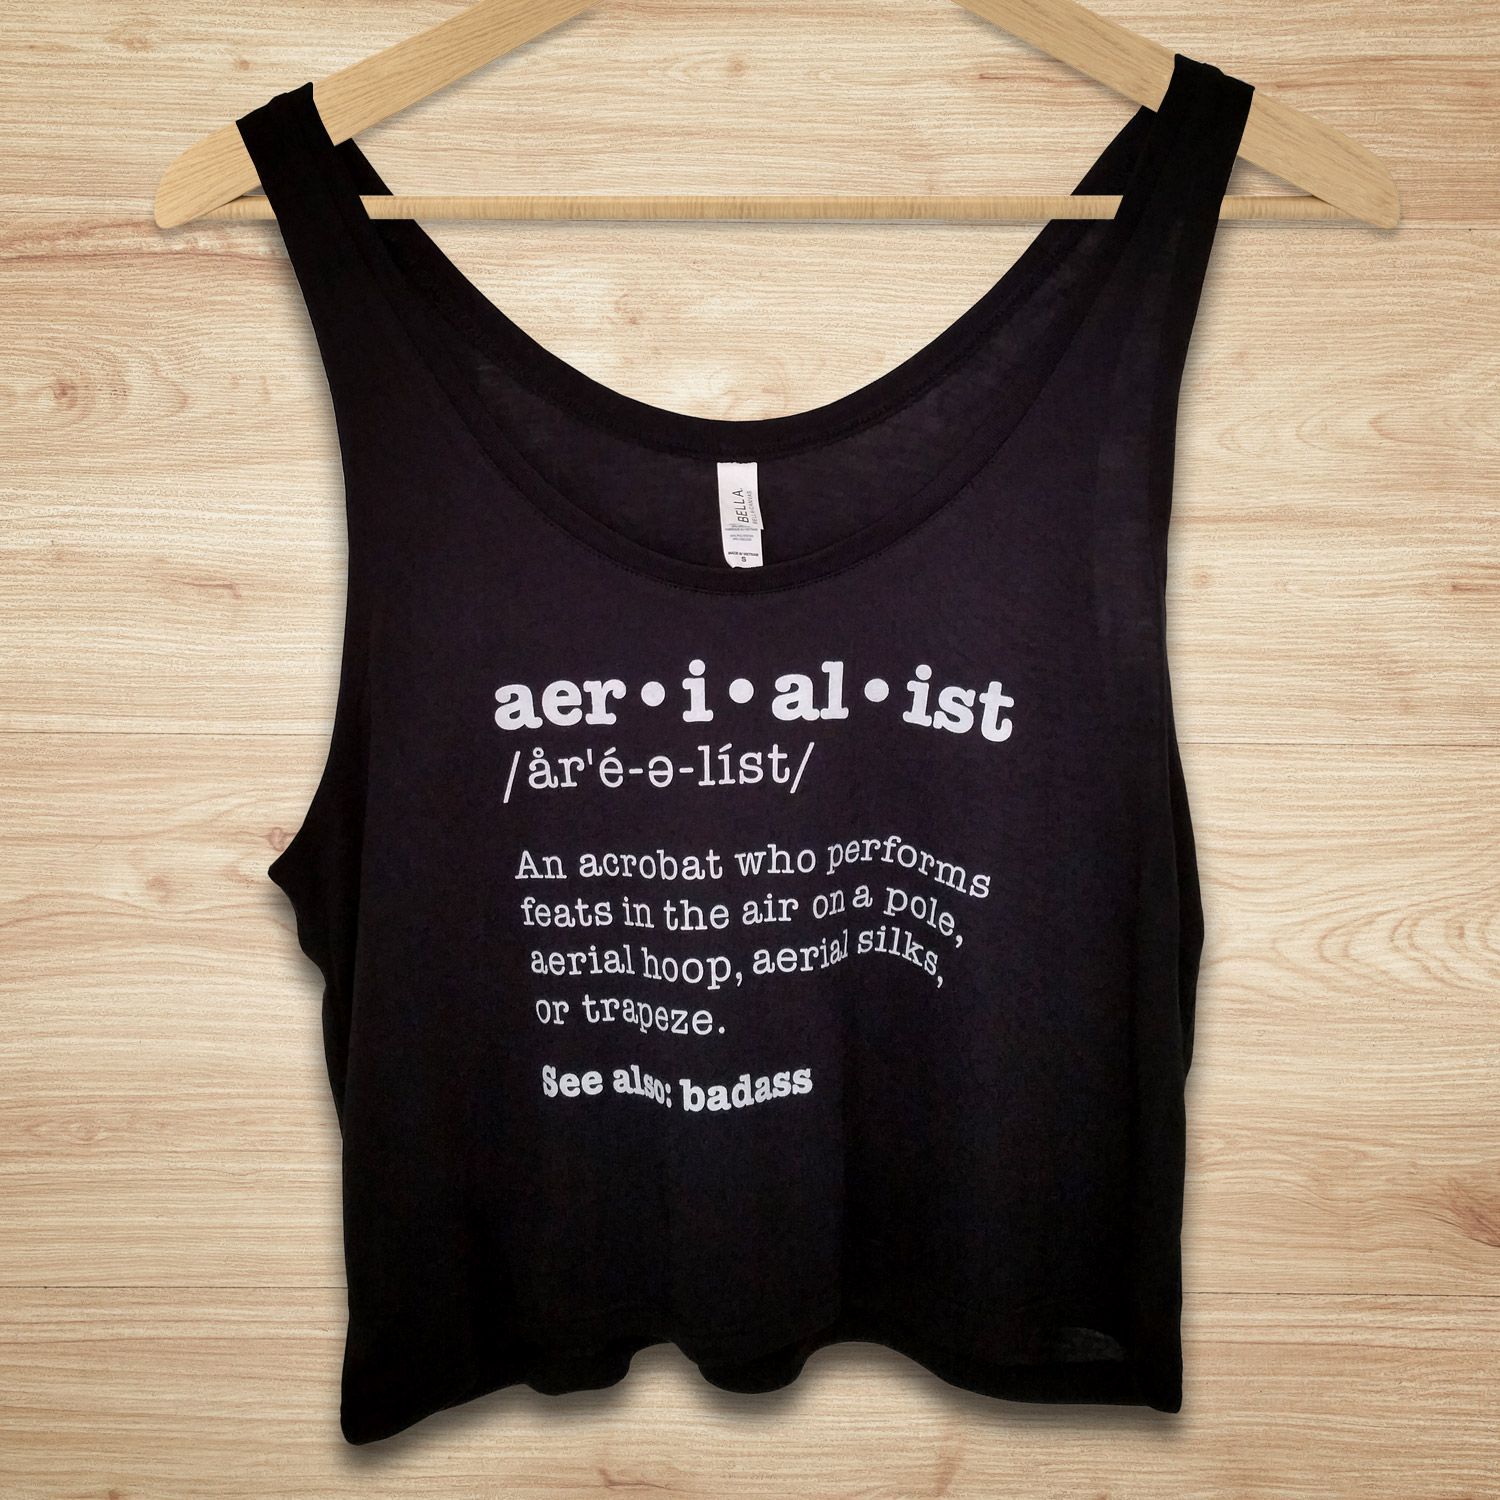 Aerialist definition crop top, perfect for pole dancers and aerial fitness enthusiasts!  Shirt reads: “Aerialist – an acrobat who